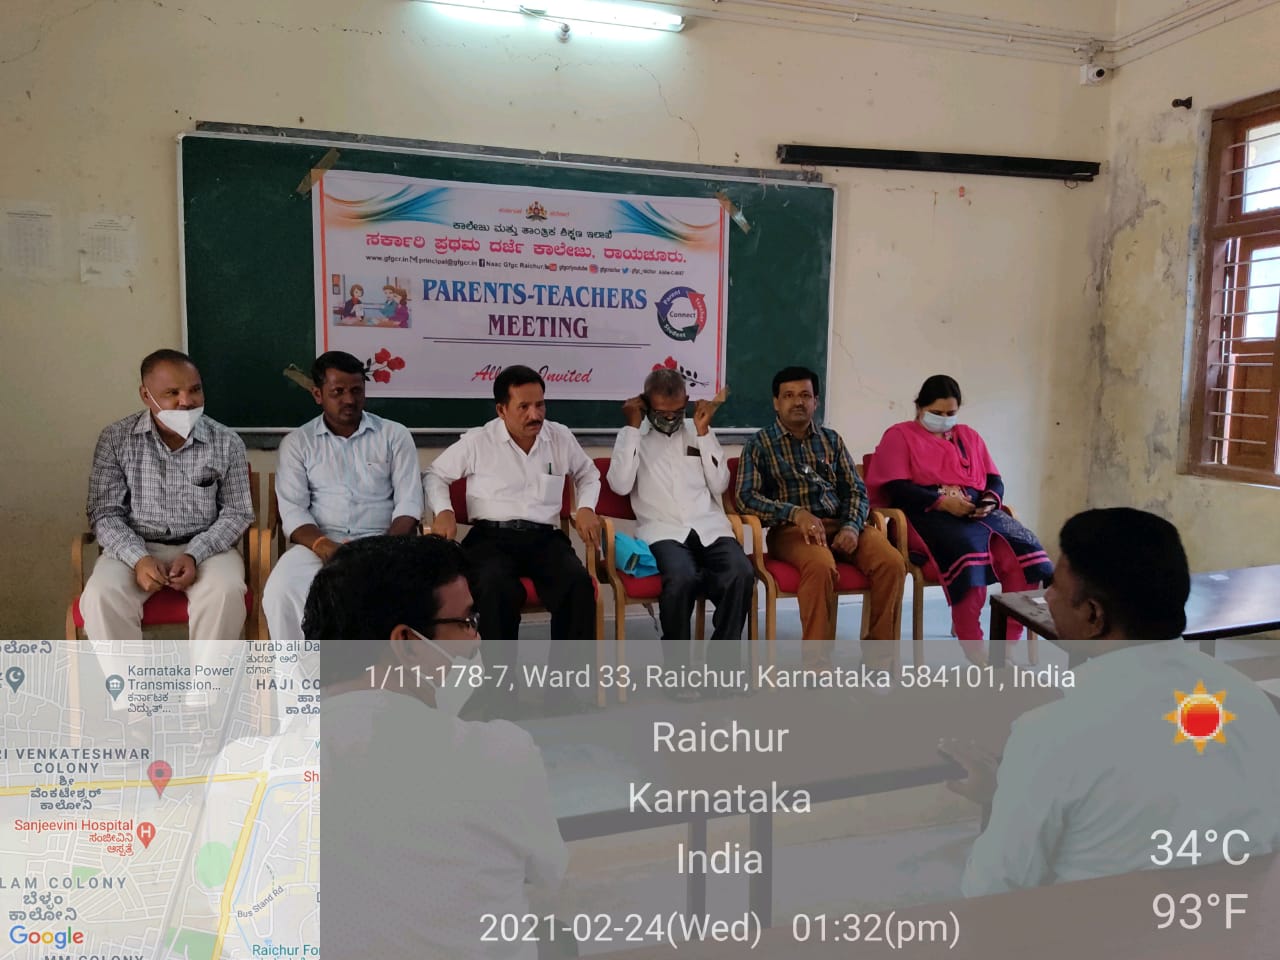 Visit to science centre, Raichur to schedule a workshop for science students